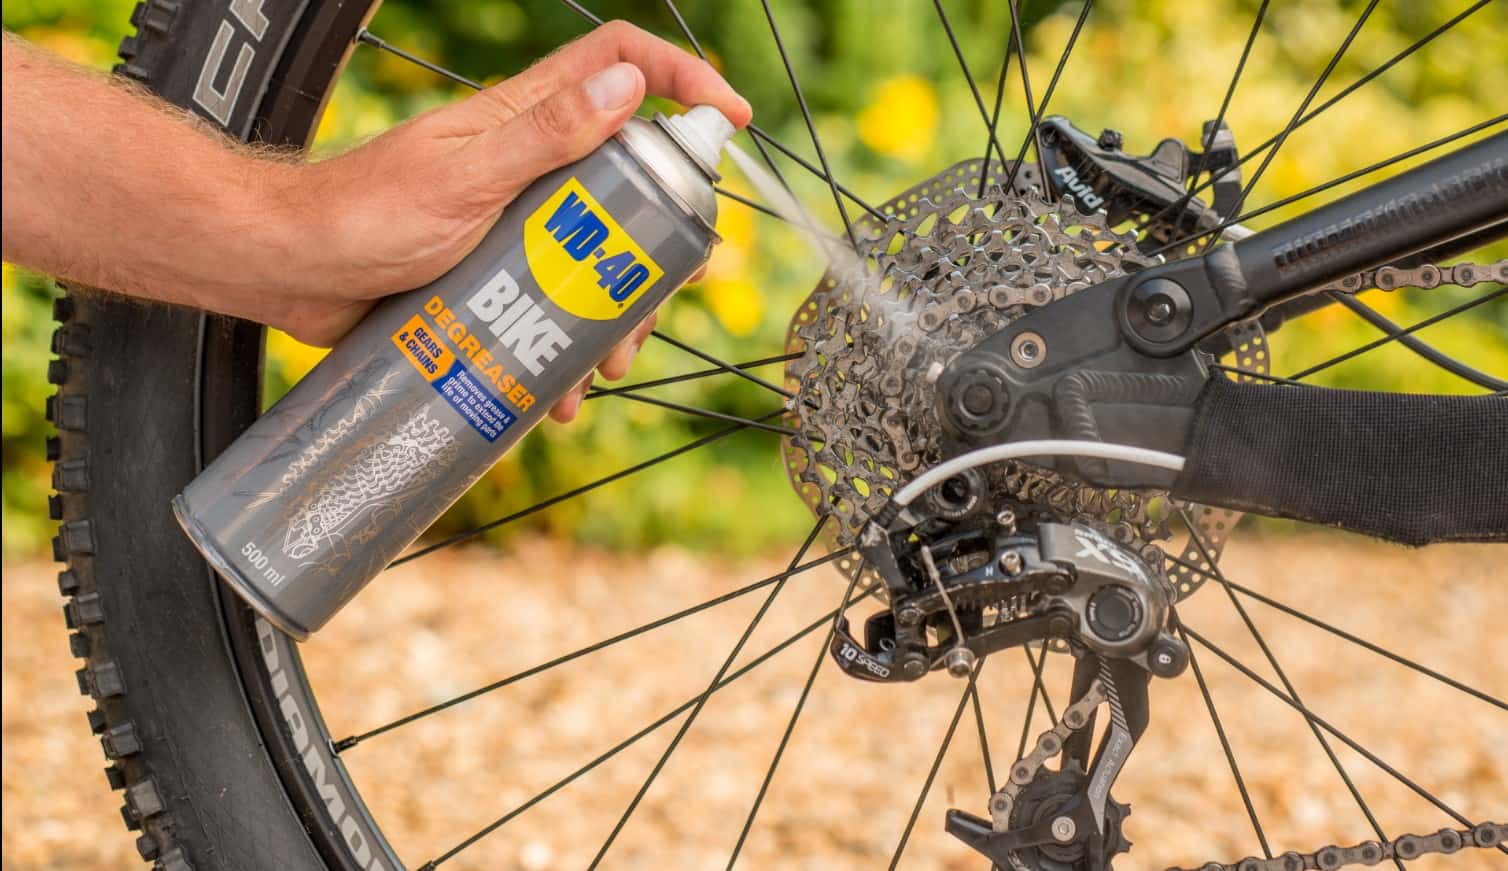 Bike Chain Cleaner How To Clean Your Bike Chain With Wd 40